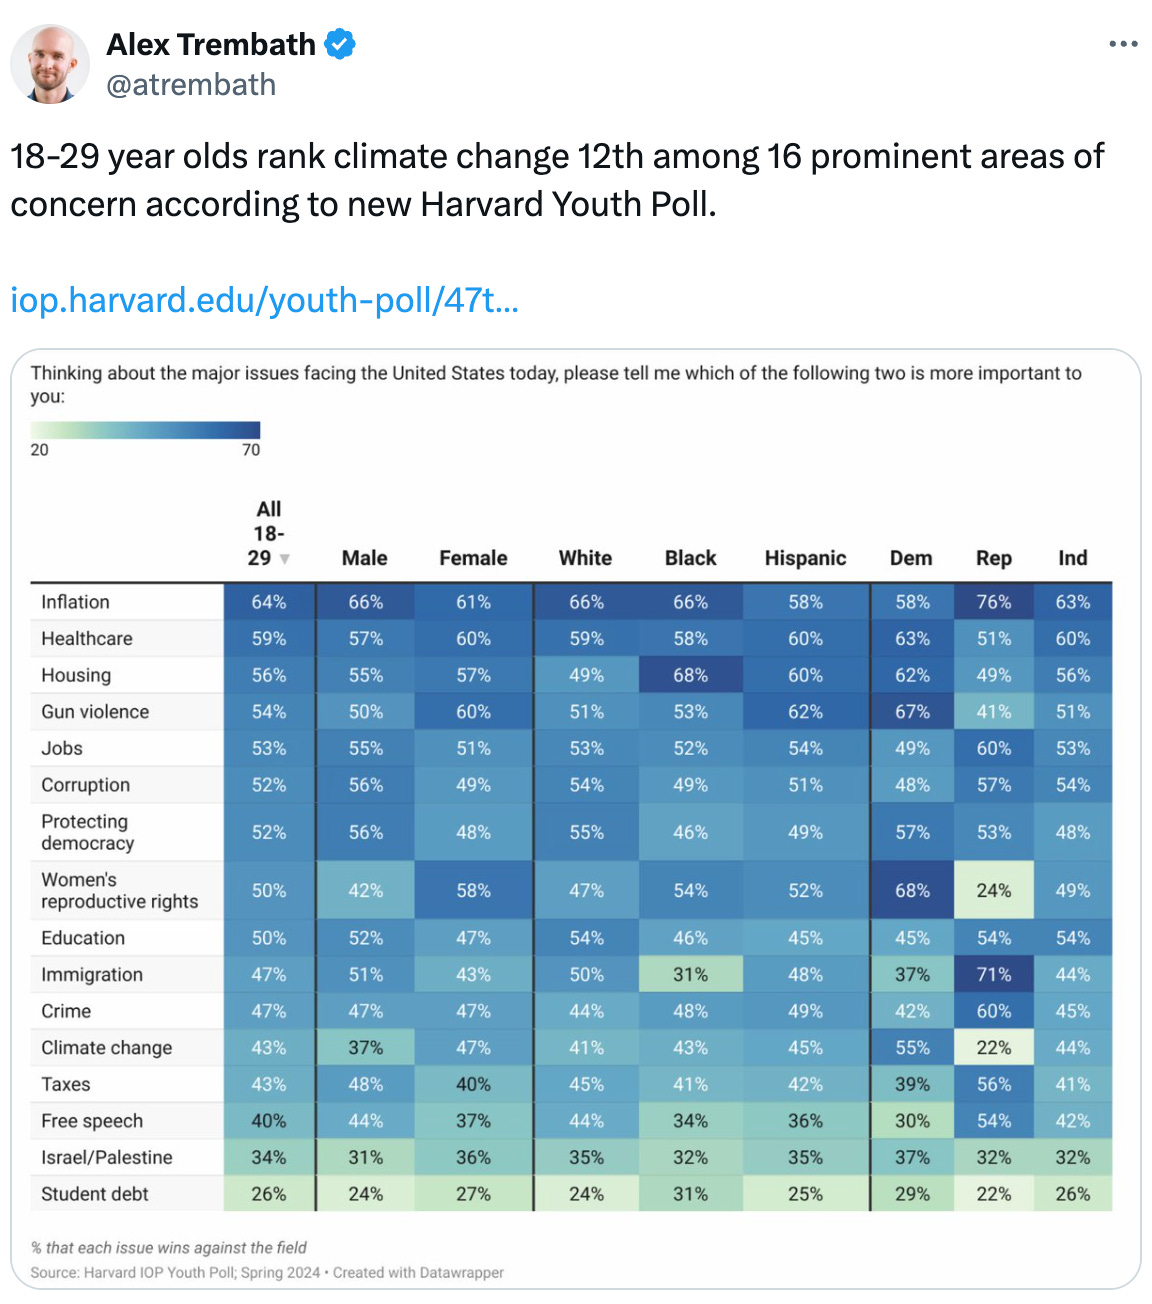  See new posts Conversation Alex Trembath @atrembath 18-29 year olds rank climate change 12th among 16 prominent areas of concern according to new Harvard Youth Poll.   https://iop.harvard.edu/youth-poll/47th-edition-spring-2024#key-takeaway--id--1564